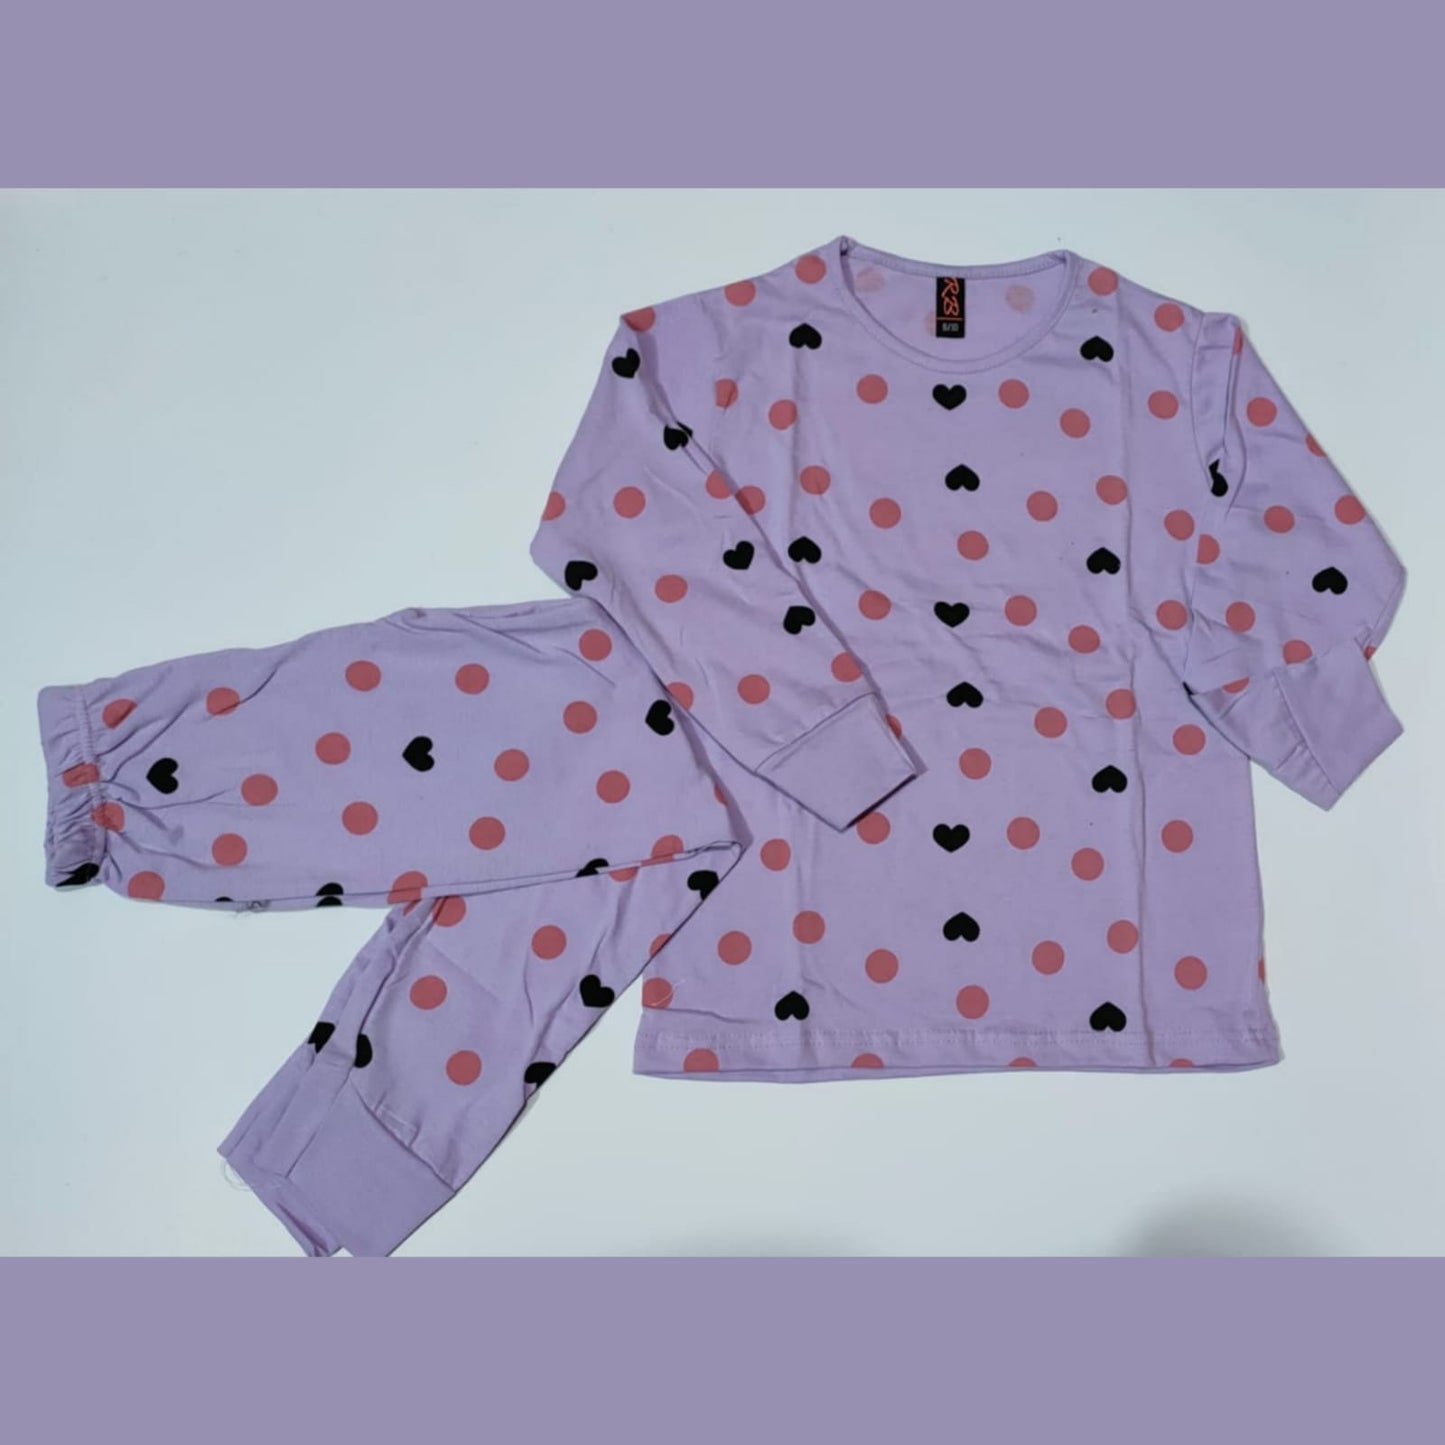 Baby or Baba Purple Hearts Print Full Sleeves Kids Suits (1 Pcs) (RX-141)